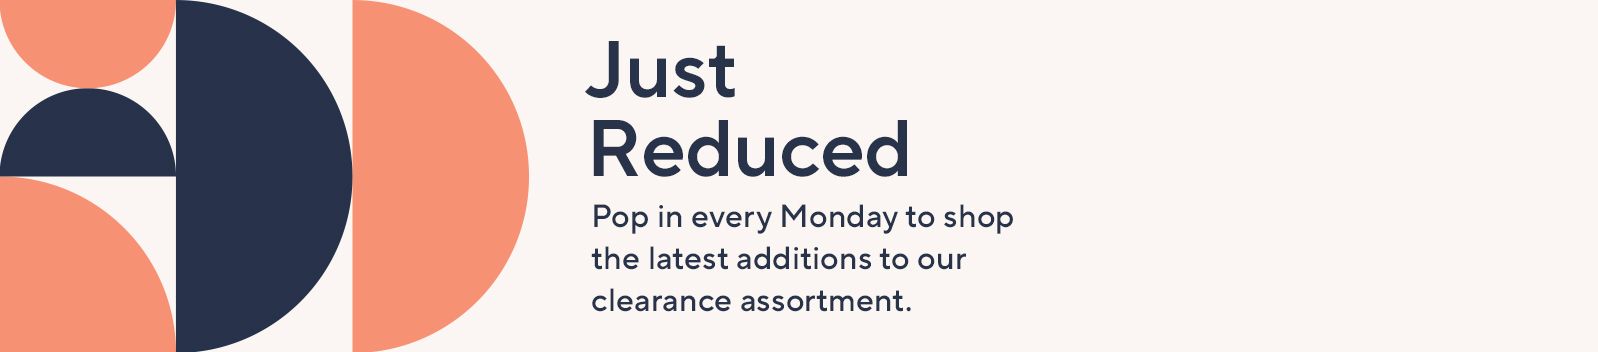 Just Reduced.  Pop in every Monday to shop the latest additions to our clearance assortment.